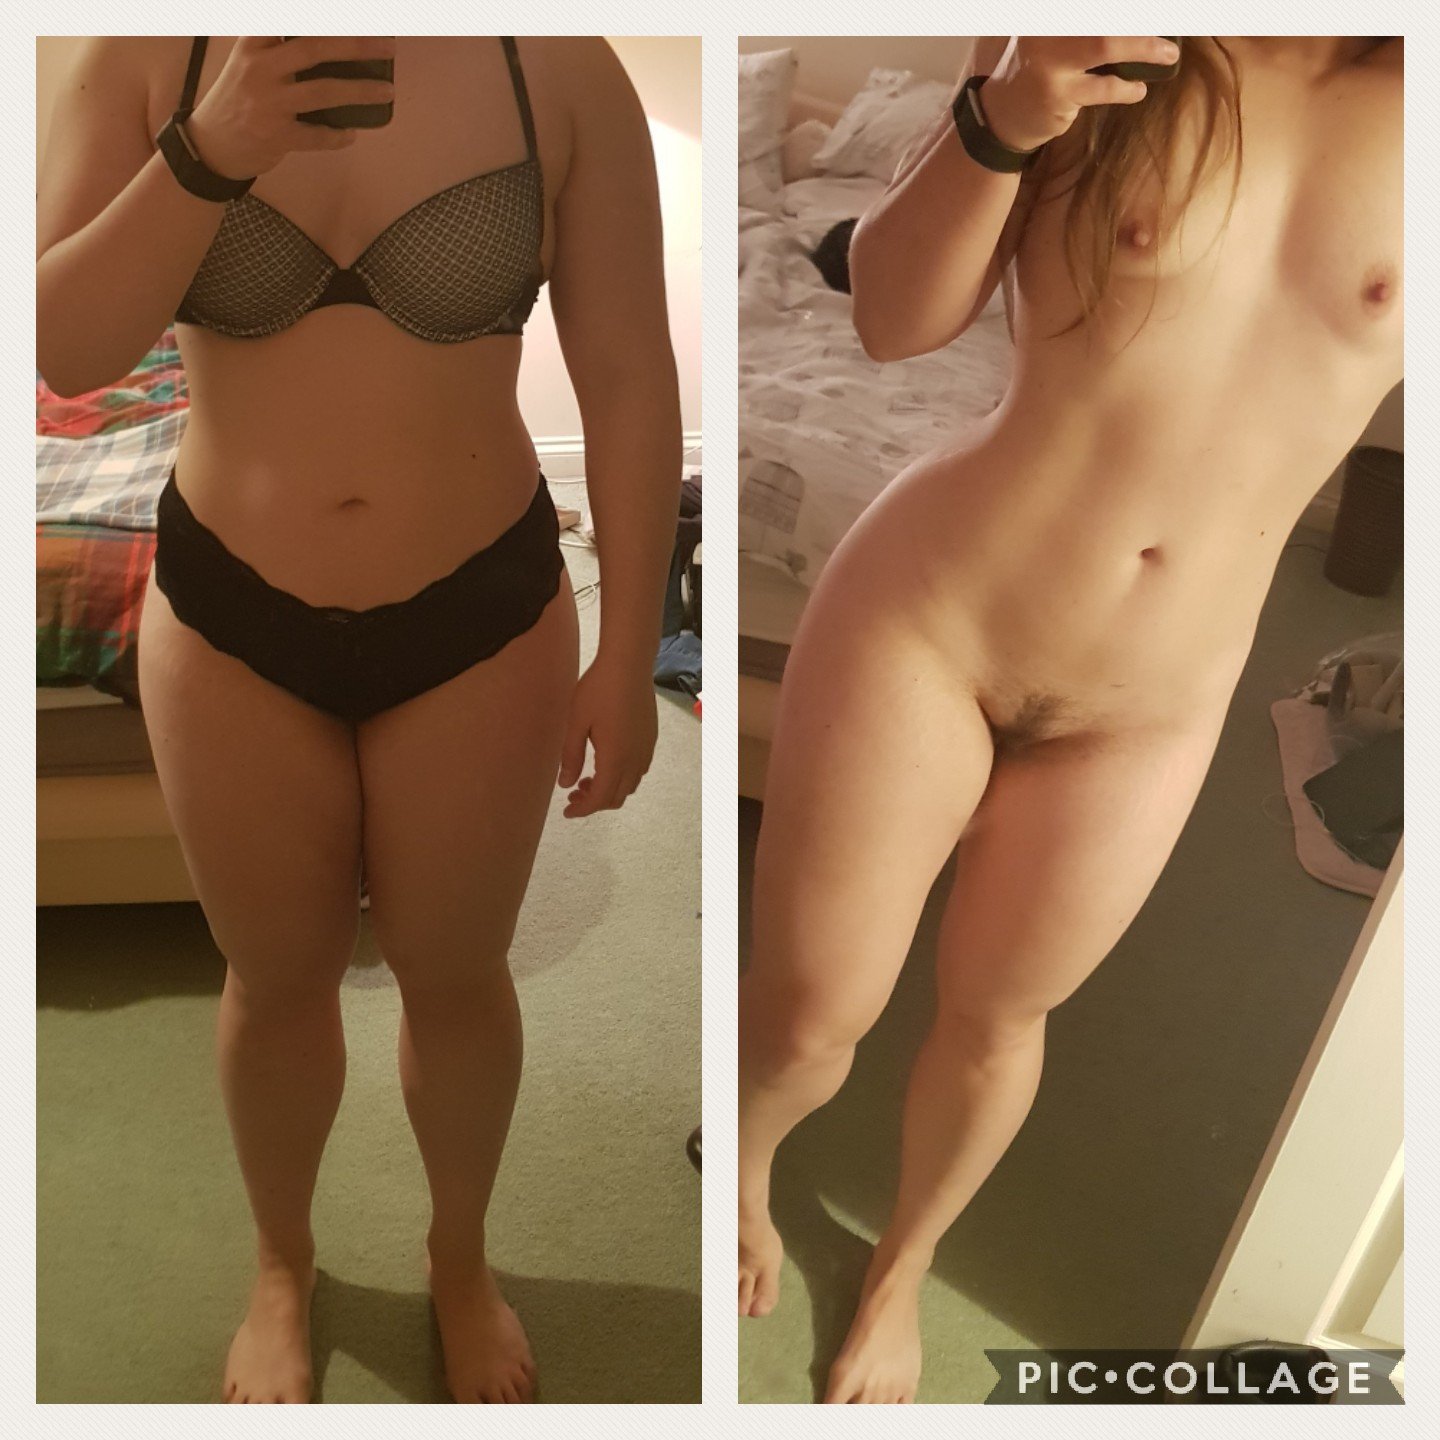 30/F/5ft3/167lbs to 154lbs. I've posted a few pictures recently of my progress, this is the difference since march this year. It's easy to think I'm not progressing, then I look at this and realise it's a slow process that takes dedication.